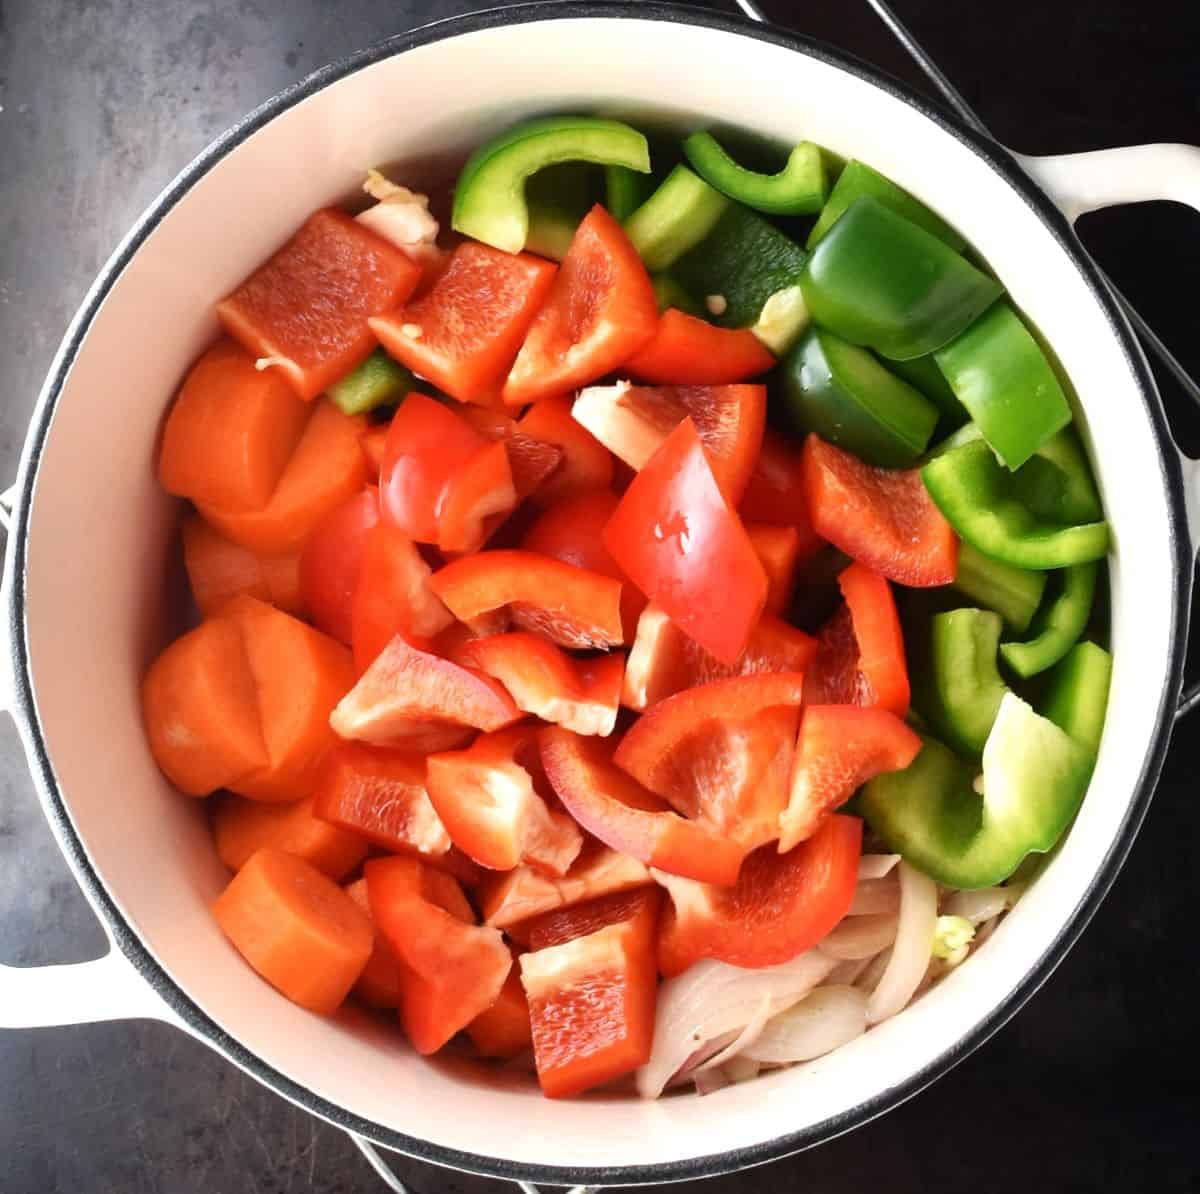 Chopped peppers for vegetable goulash in pot.